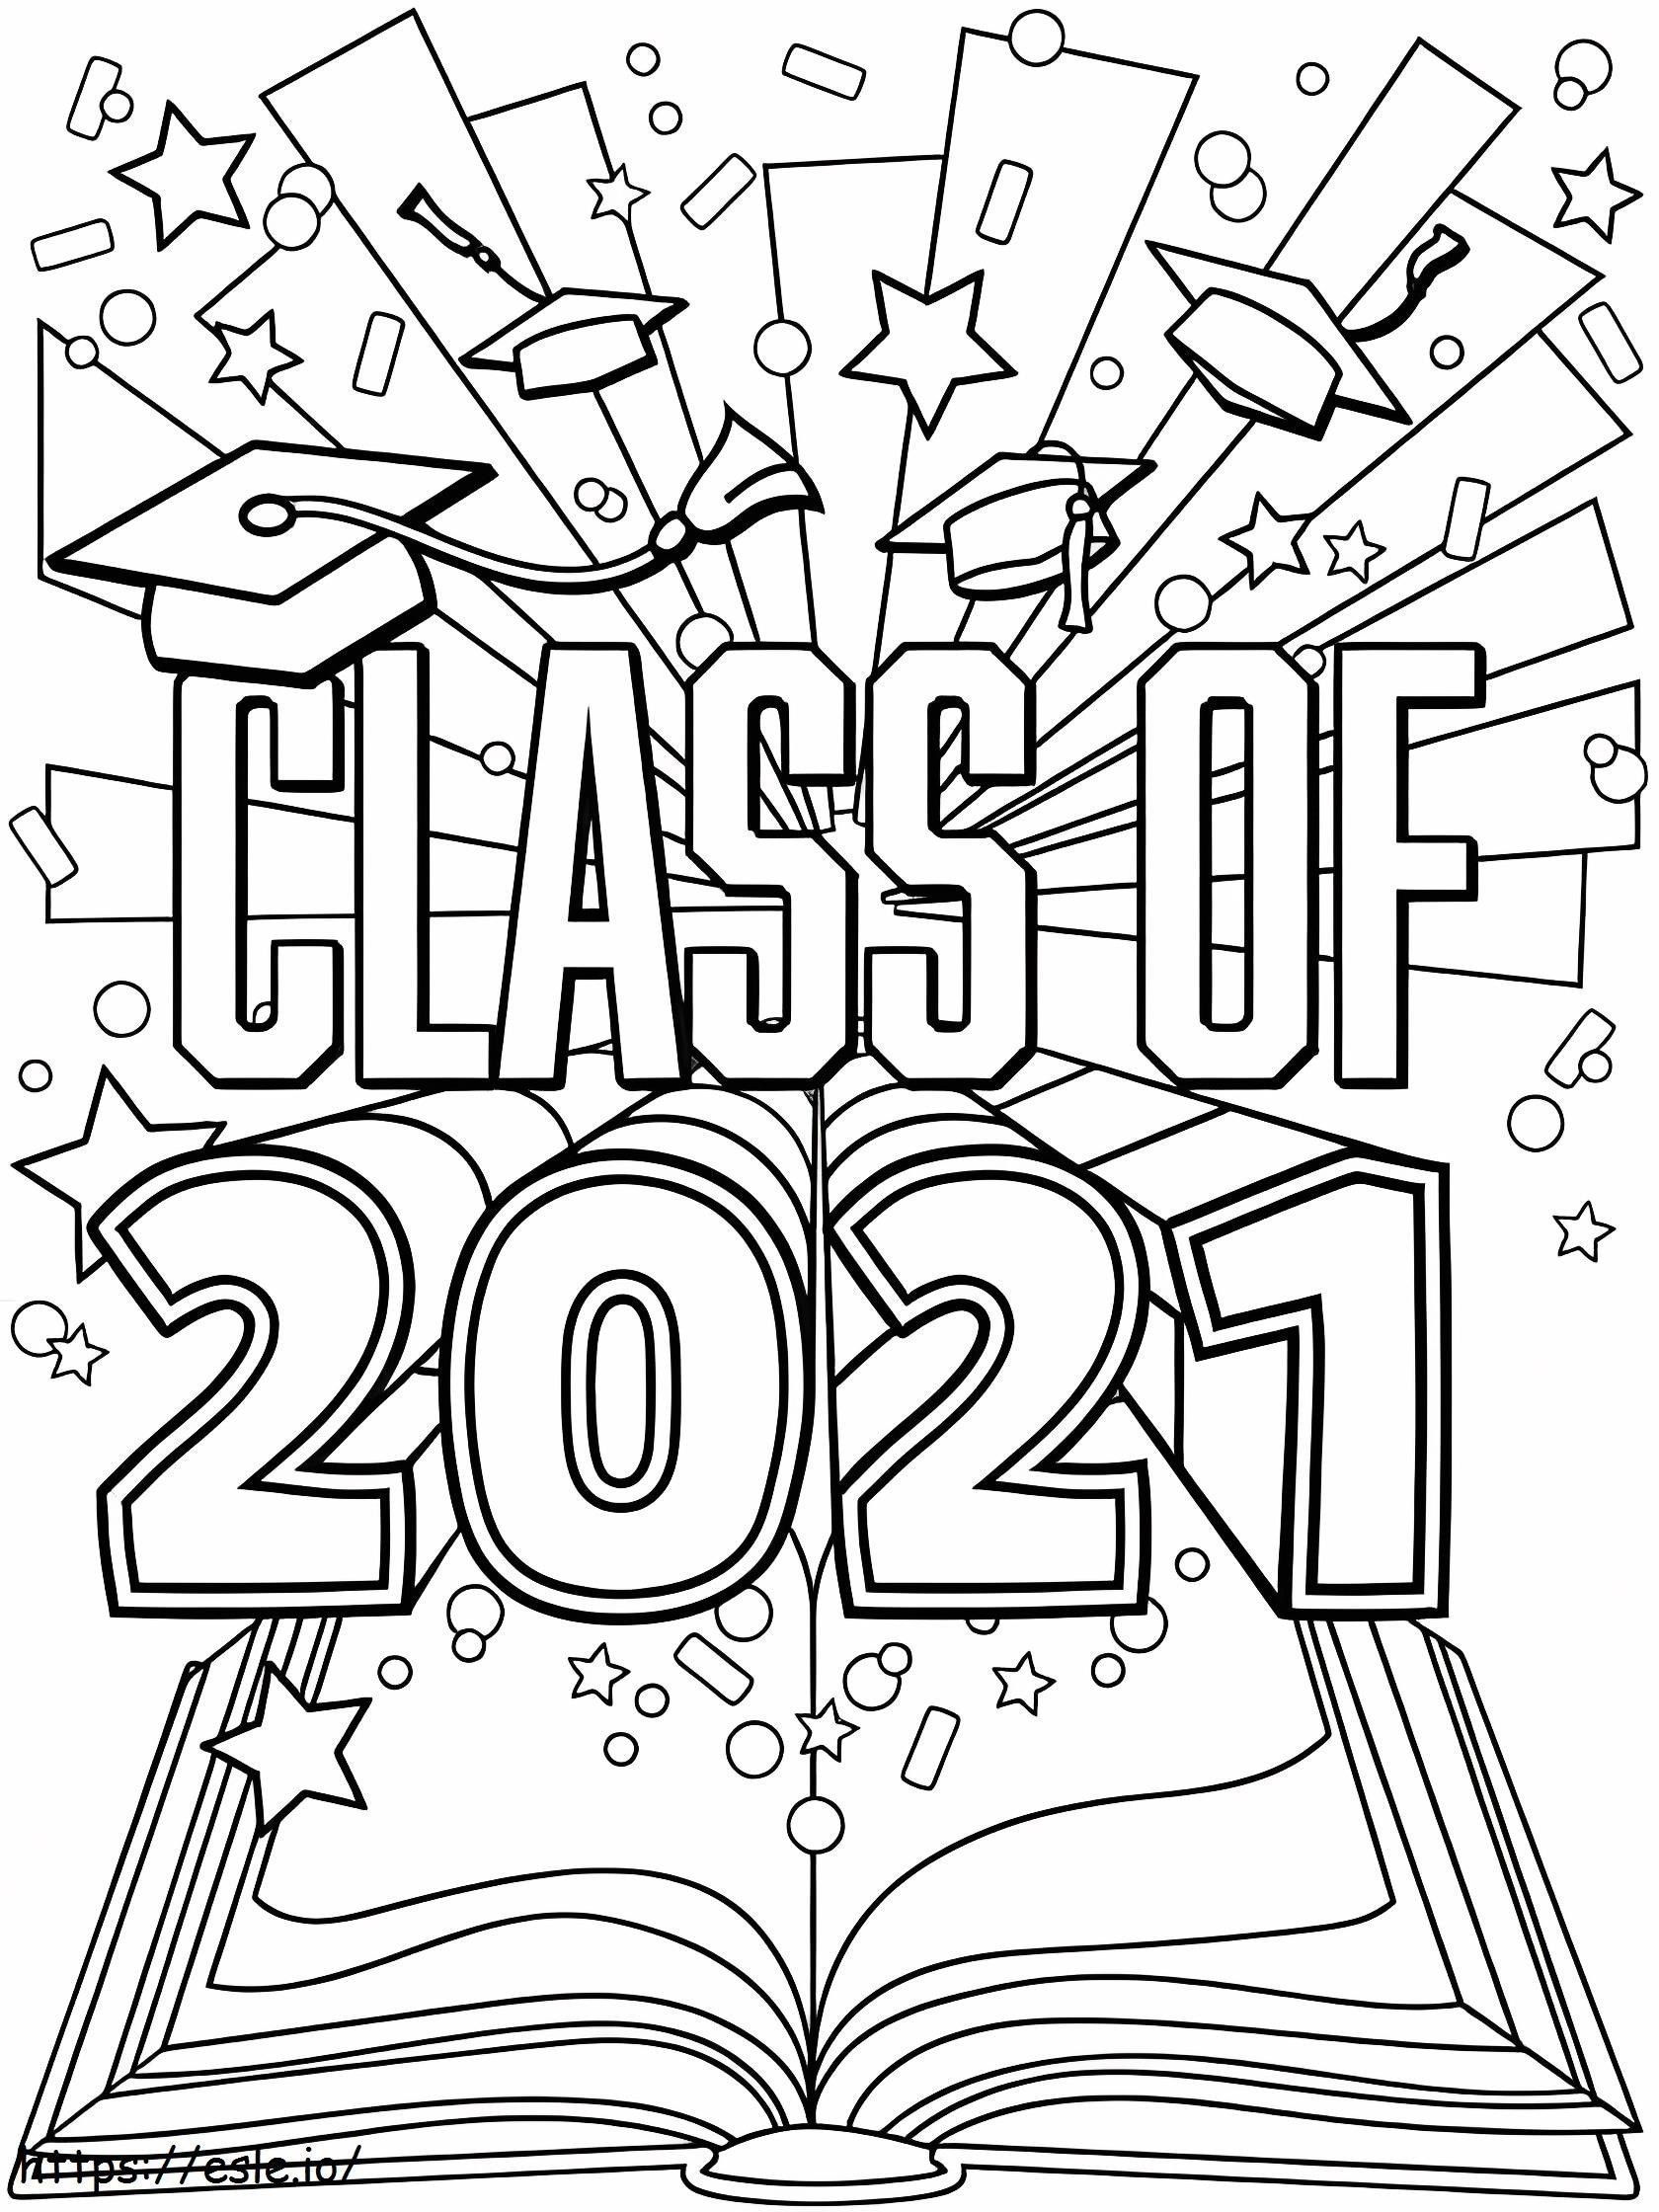 Class Of 2021 Graduation coloring page